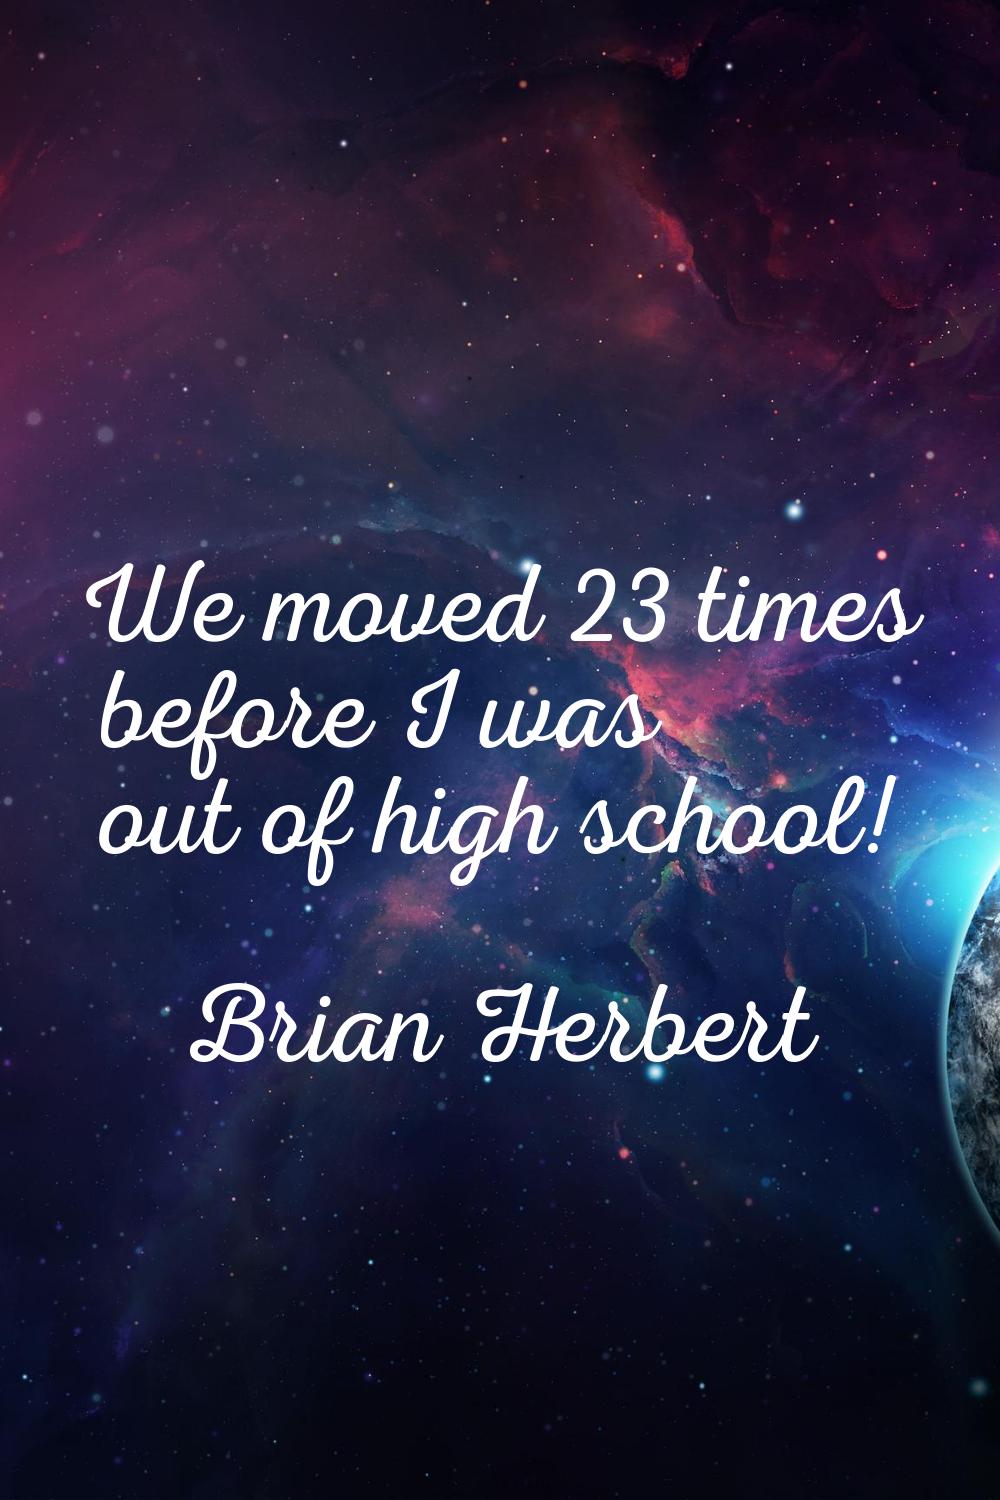 We moved 23 times before I was out of high school!